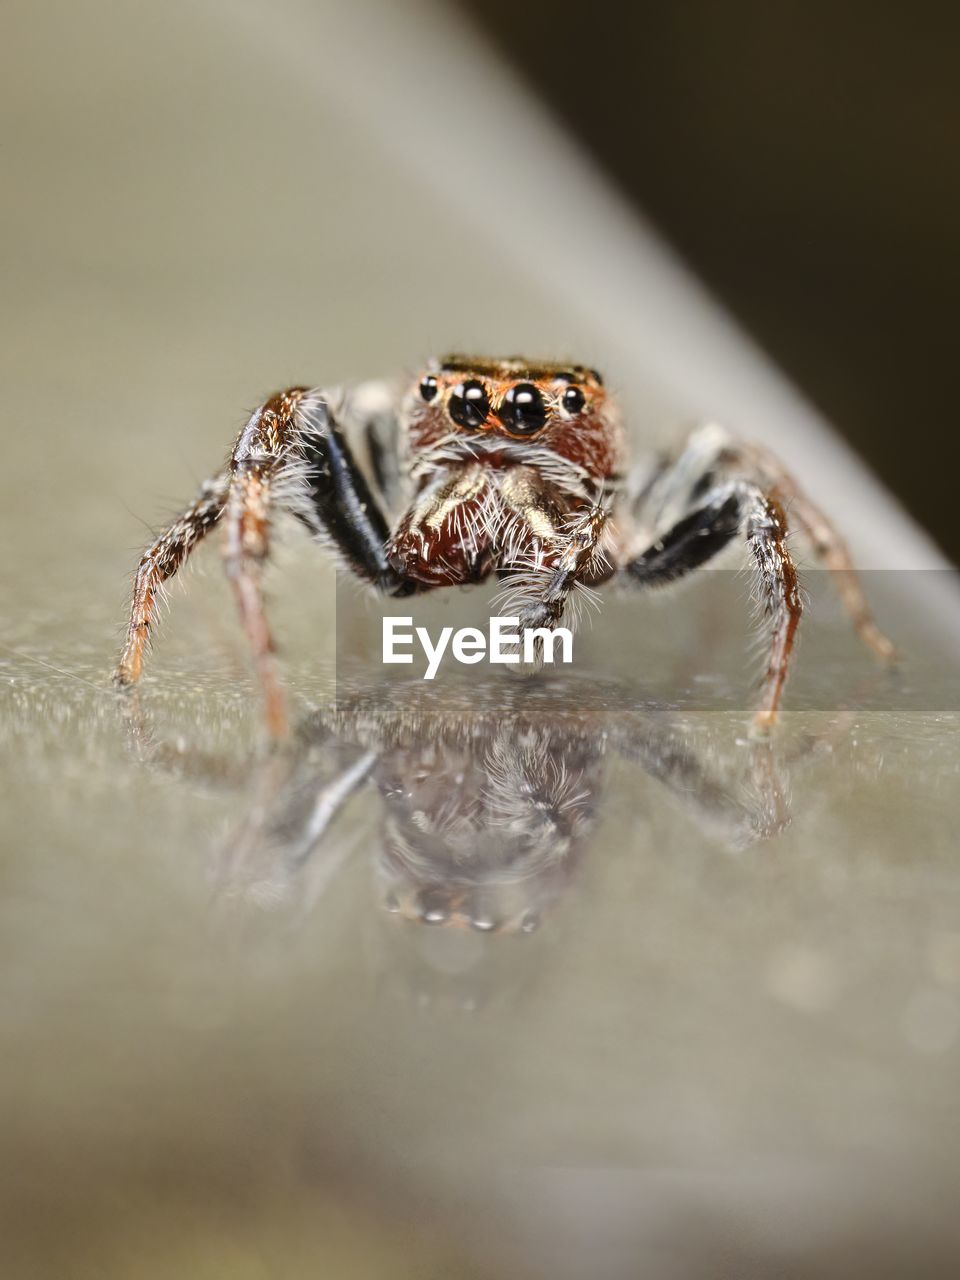 animal themes, animal, one animal, animal wildlife, close-up, macro photography, wildlife, spider, arachnid, selective focus, jumping spider, insect, no people, animal body part, nature, macro, outdoors, portrait, zoology, eye, day, water, looking at camera